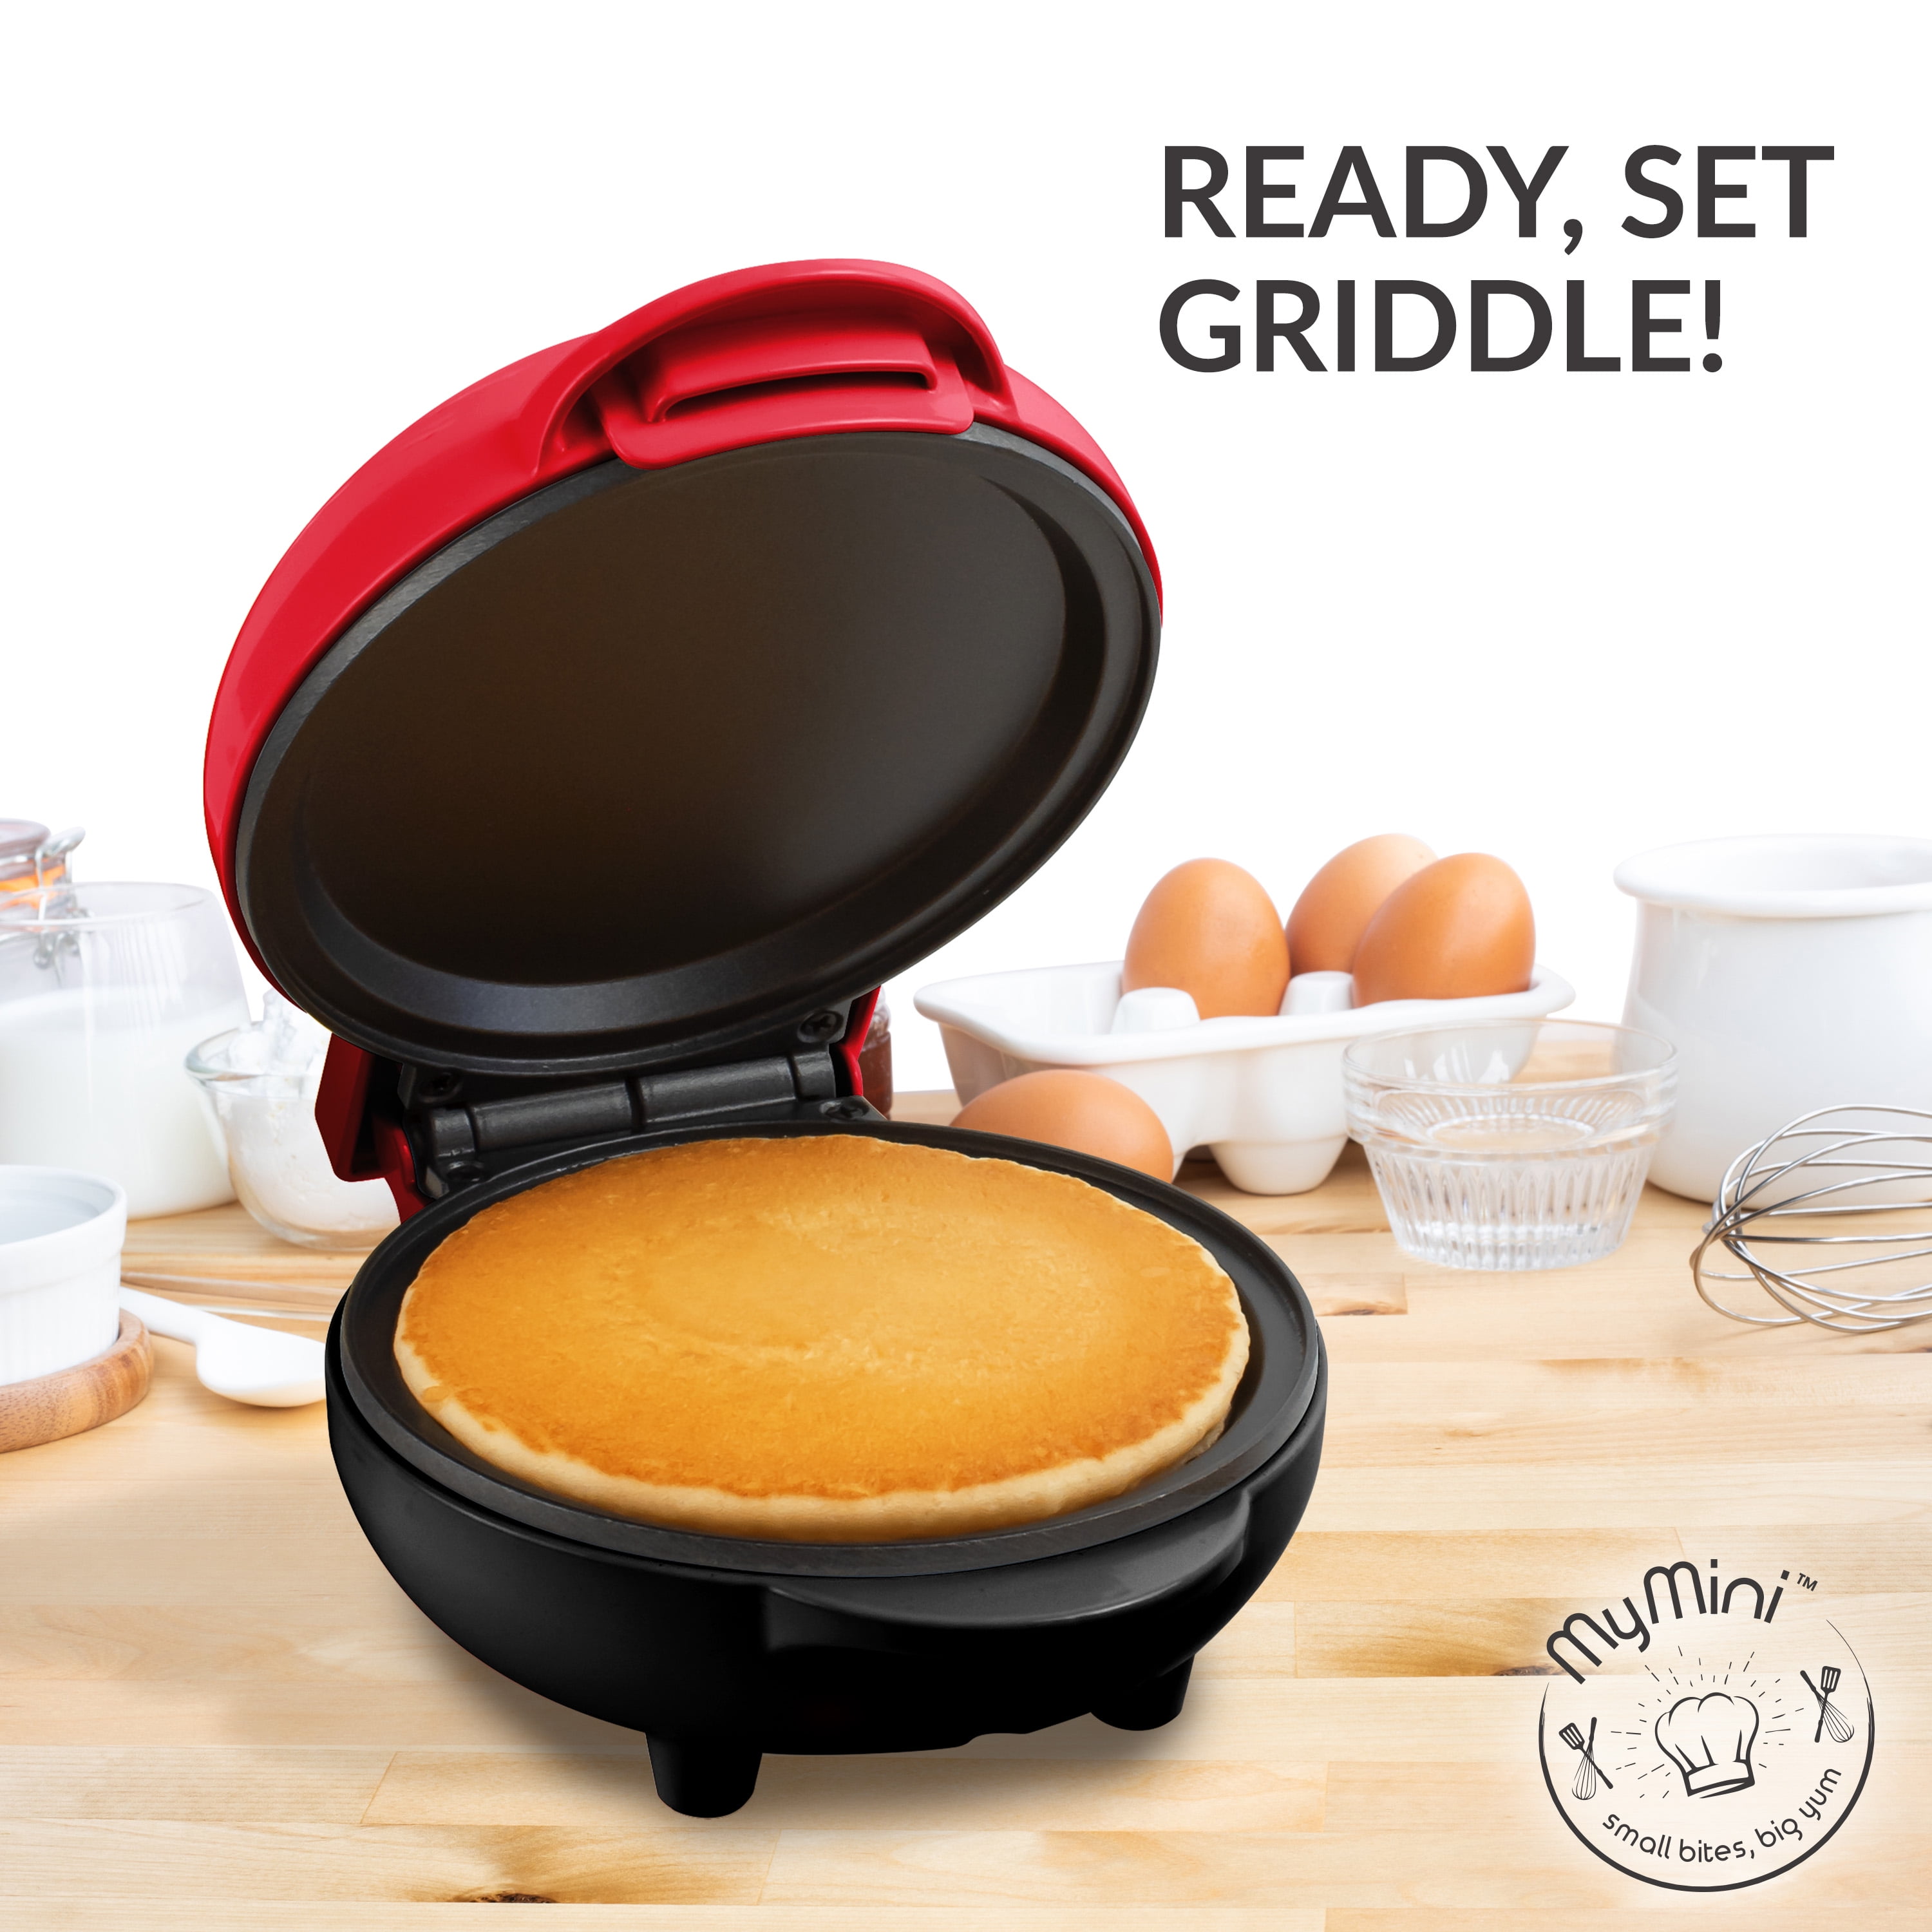 FineMade Mini Pancakes Maker Machine with Non Stick Plates, Small Pancake  Griddle, Makes 8 x 2” Tiny and Flat Pancakes, Ideal for Breakfast, Snacks